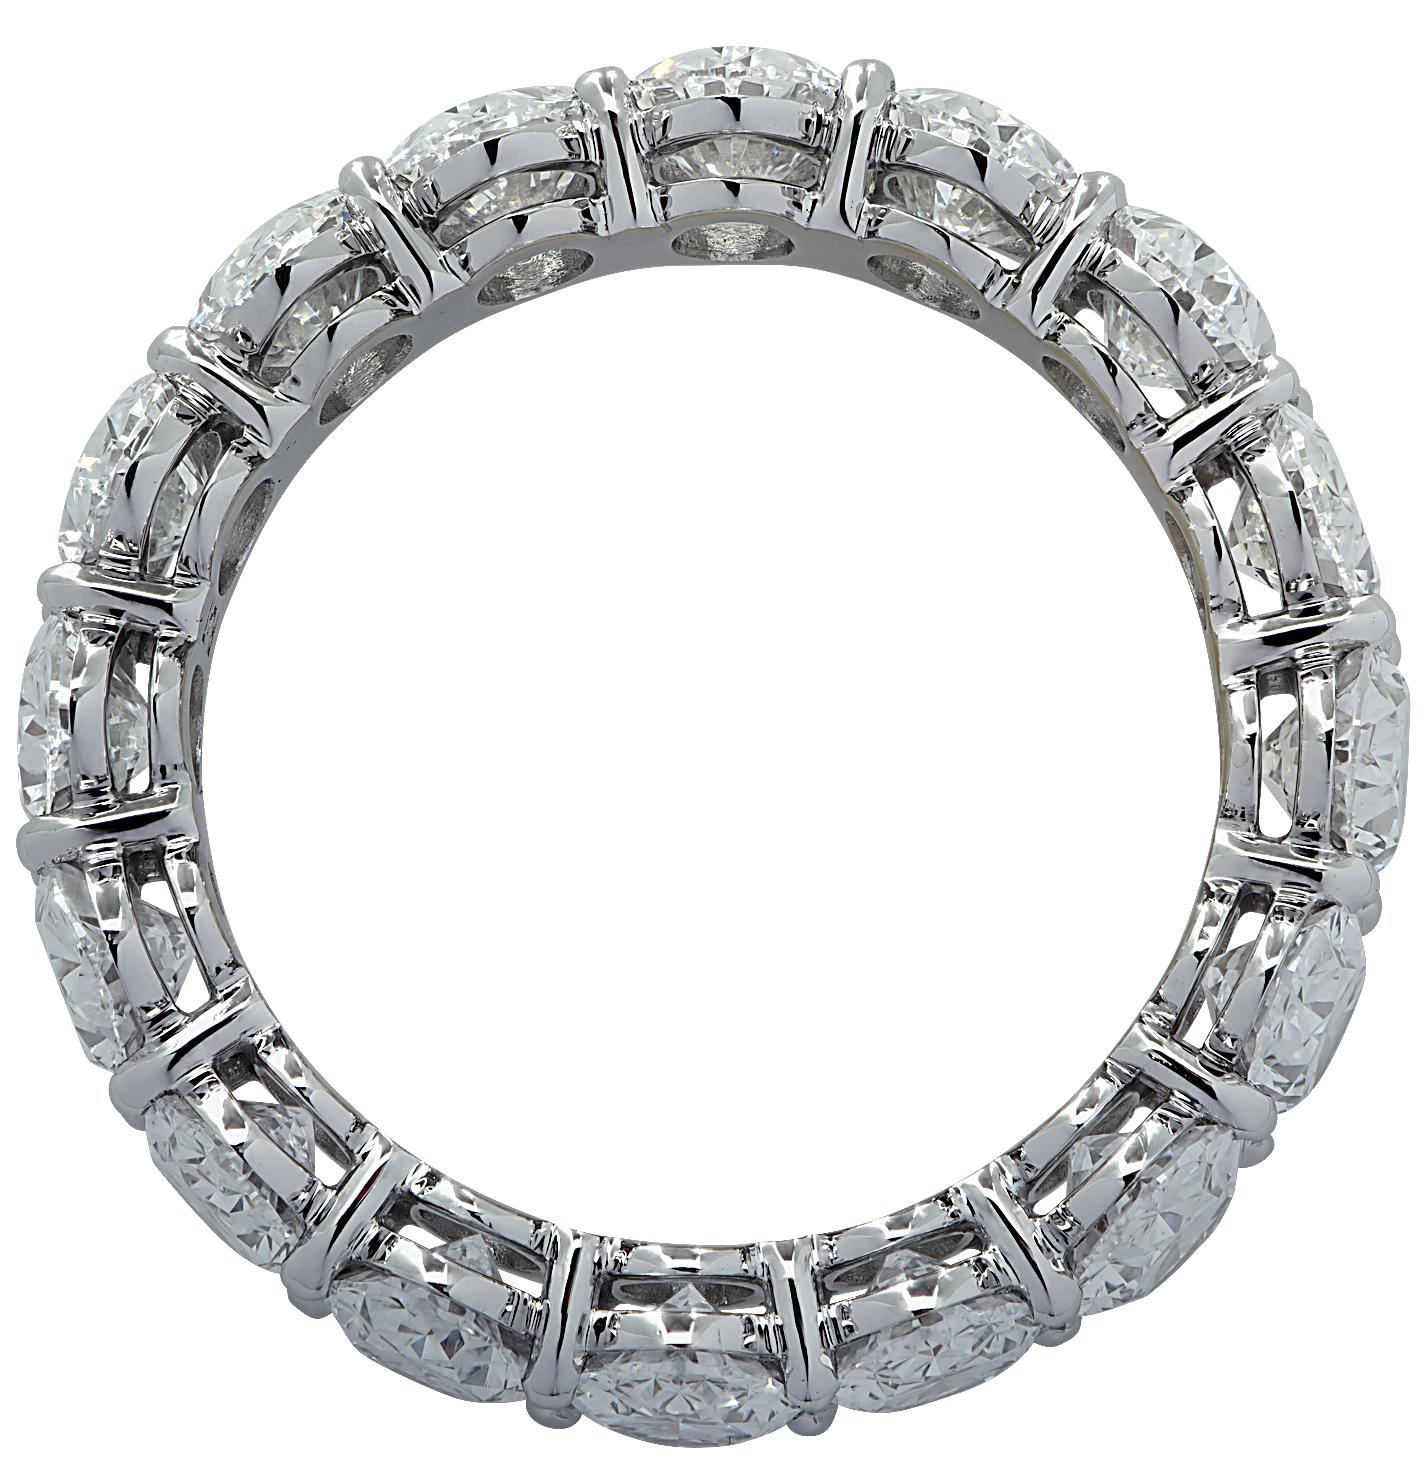 Oval Cut Vivid Diamonds GIA Certified 5.35 Carat Oval Eternity Band For Sale